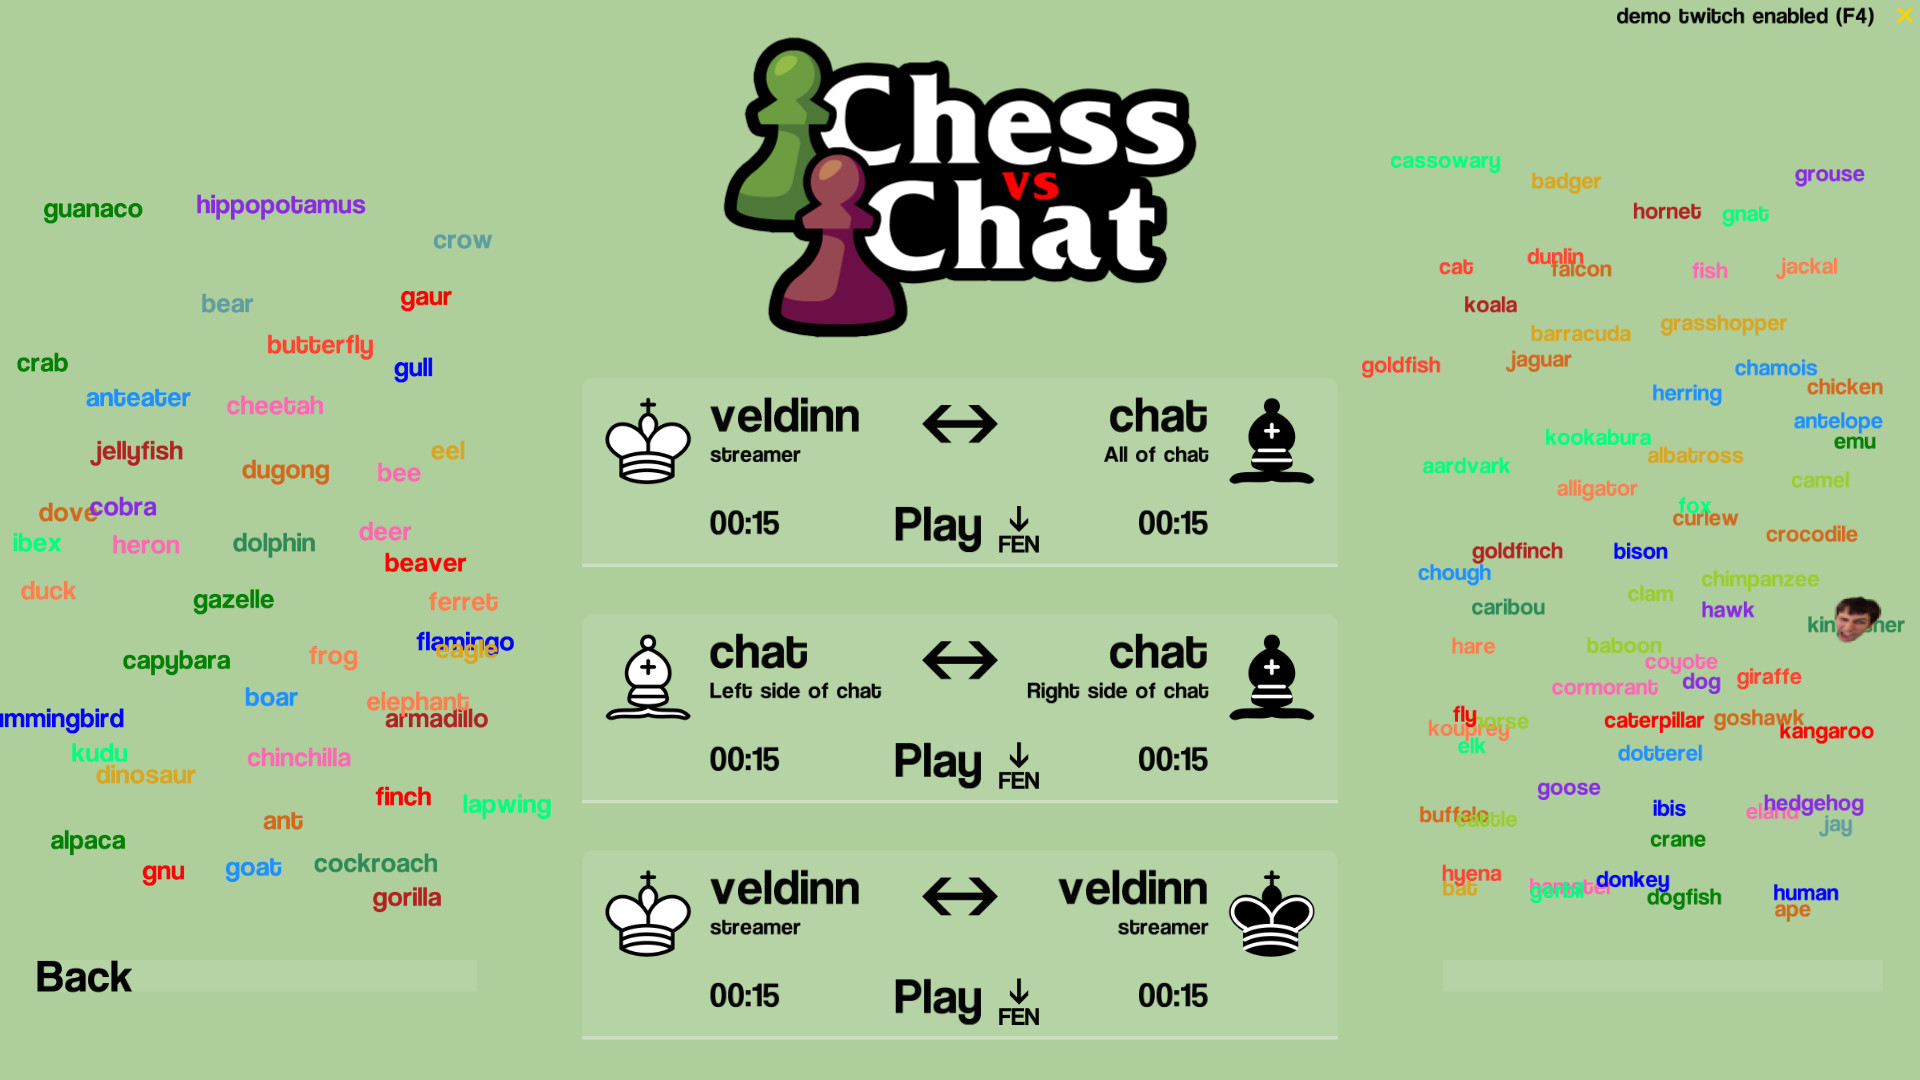 Twitch Chess move filter